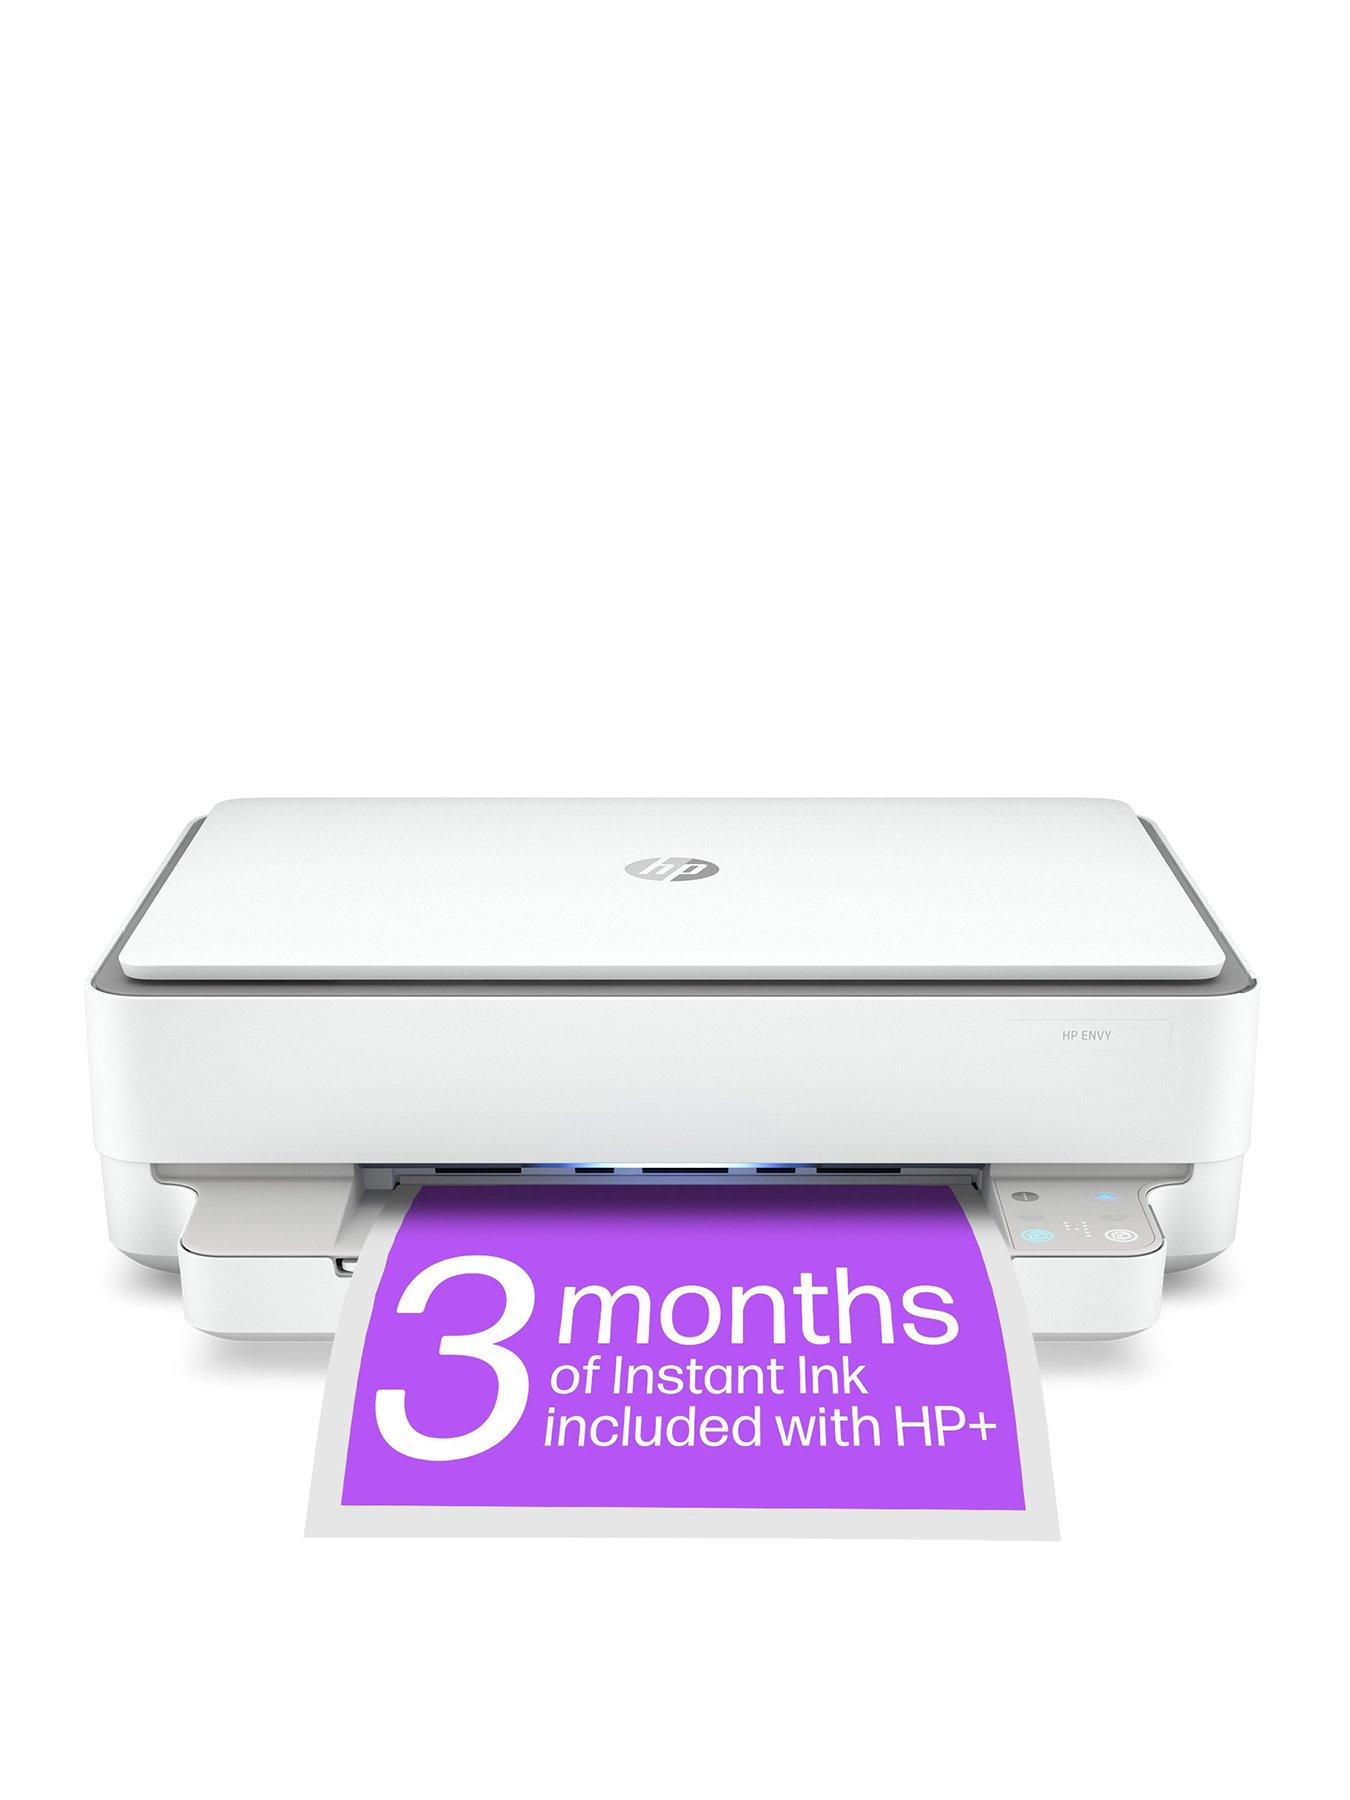 Hp Envy 6020E All In One Wireless Colour Printer With 3 Months Of Instant Ink Included With Hp+